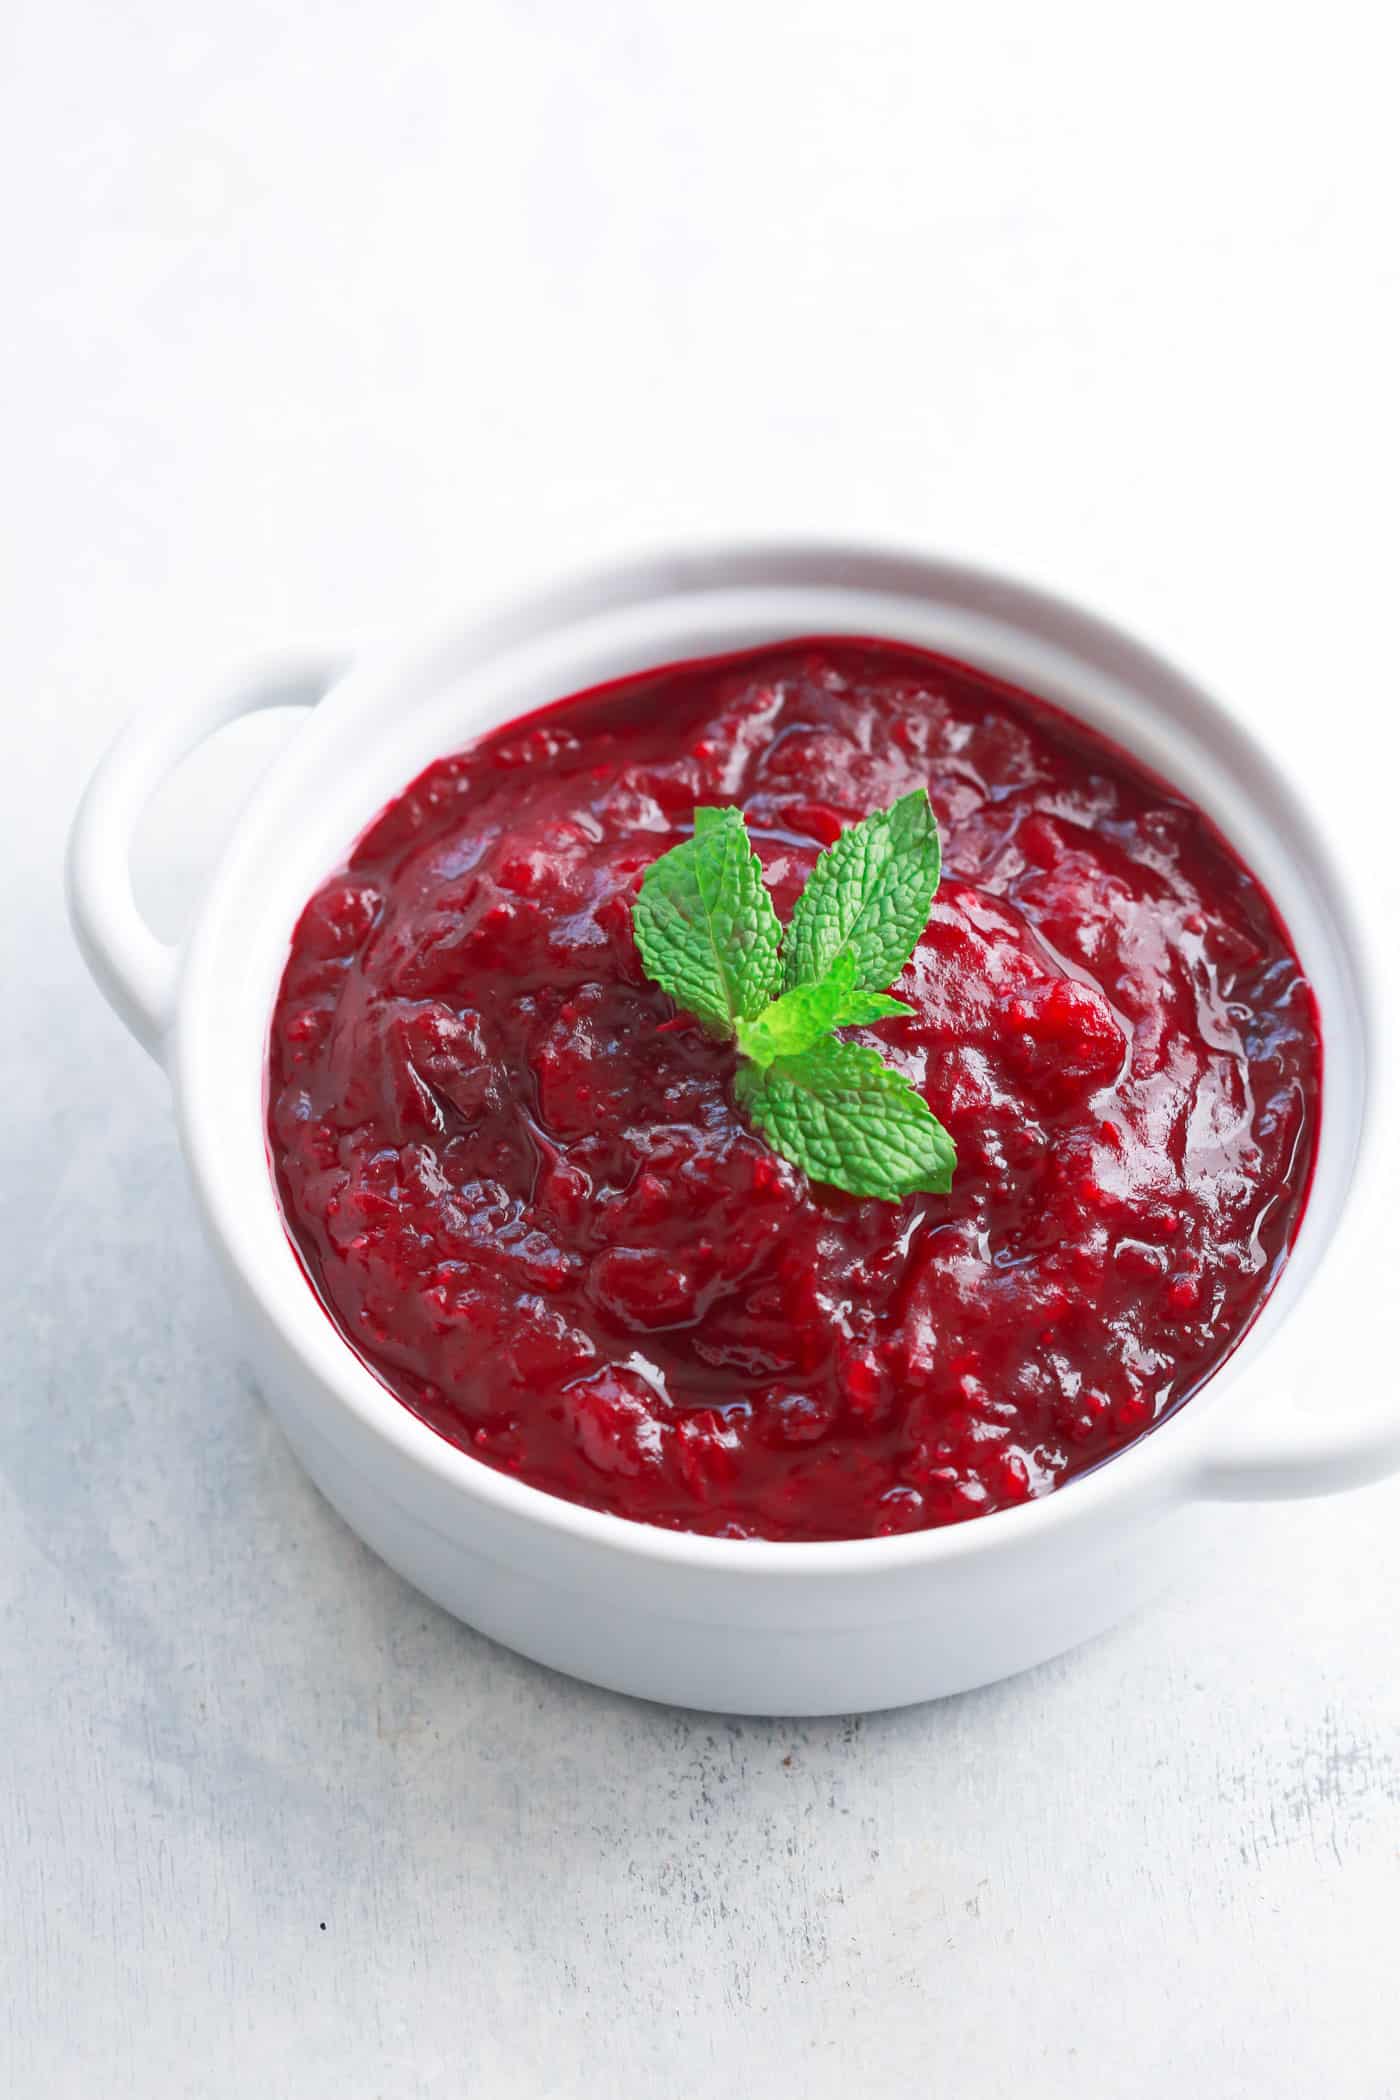 This Instant Pot Low-carb Cranberry Sauce is the easiest and fastest recipe you will ever make for the holiday season. It's delicious and more important it's sugar-free! 